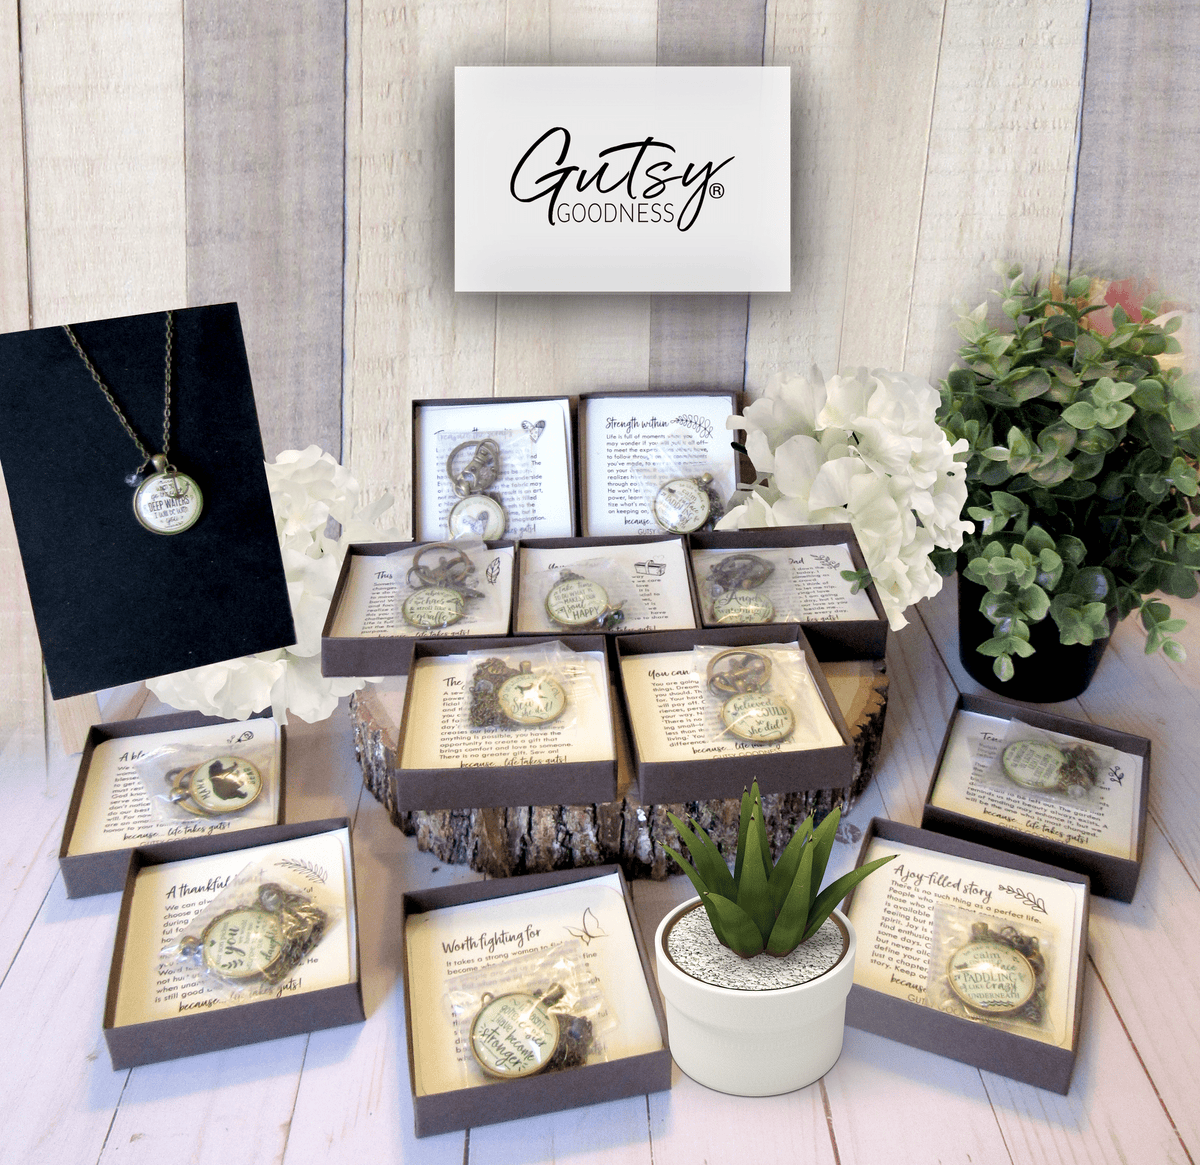 Starter Pack Faith Collection Handmade Necklaces Assortment Kit Encouragement Scripture Theme 12 Individual Gift Boxes - Gutsy Goodness